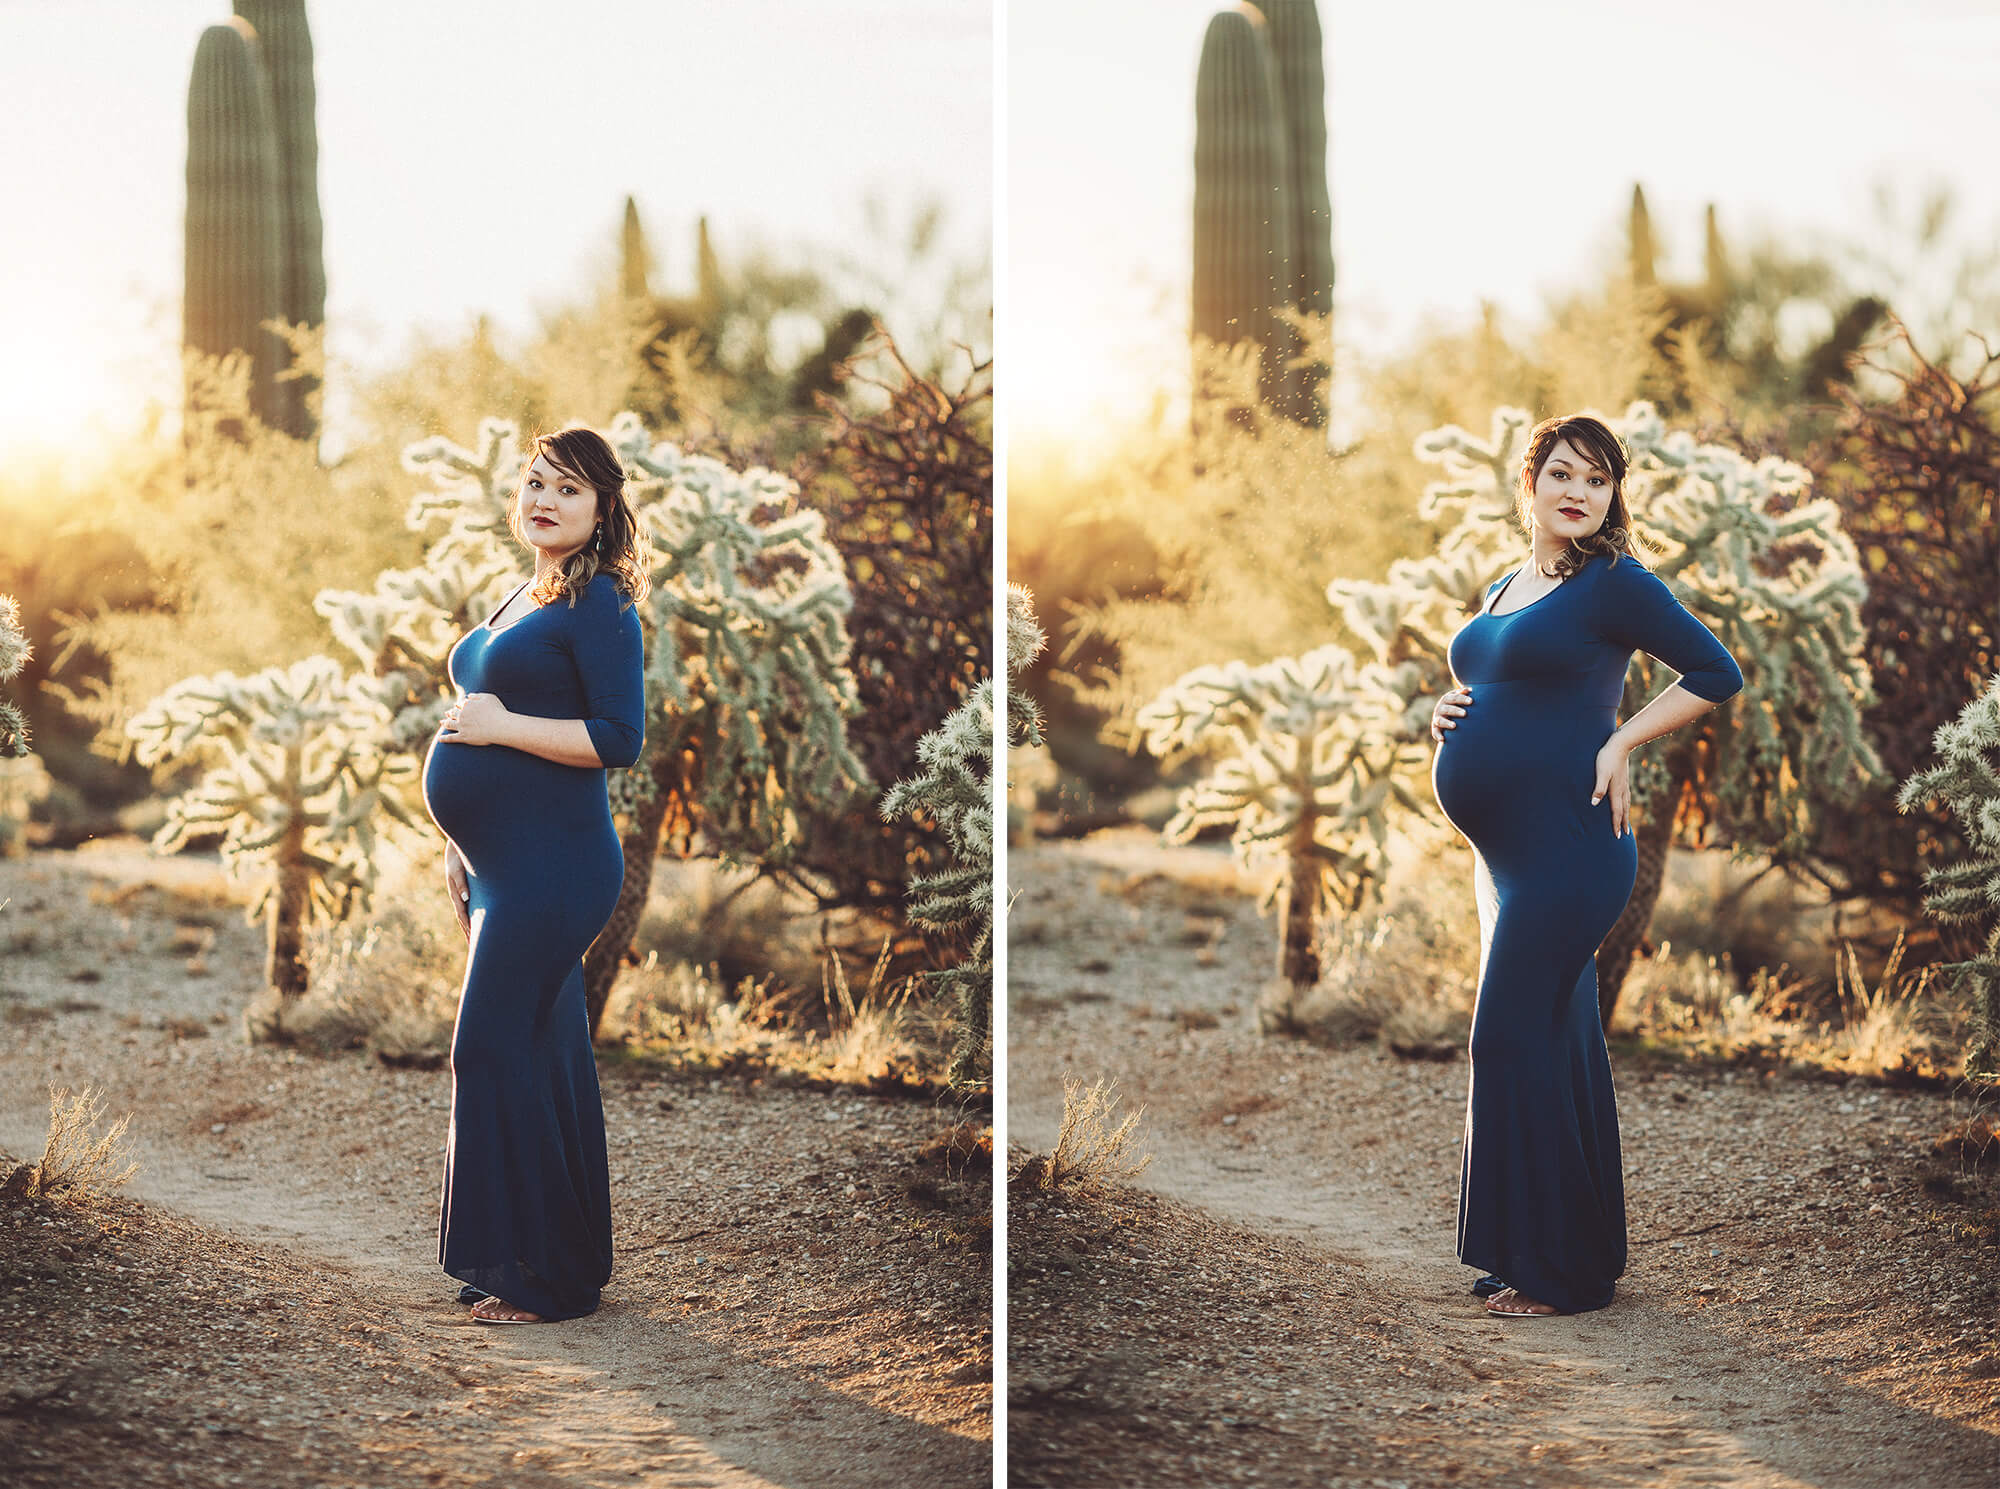 A sunset maternity with Alicia in blue against the desert background